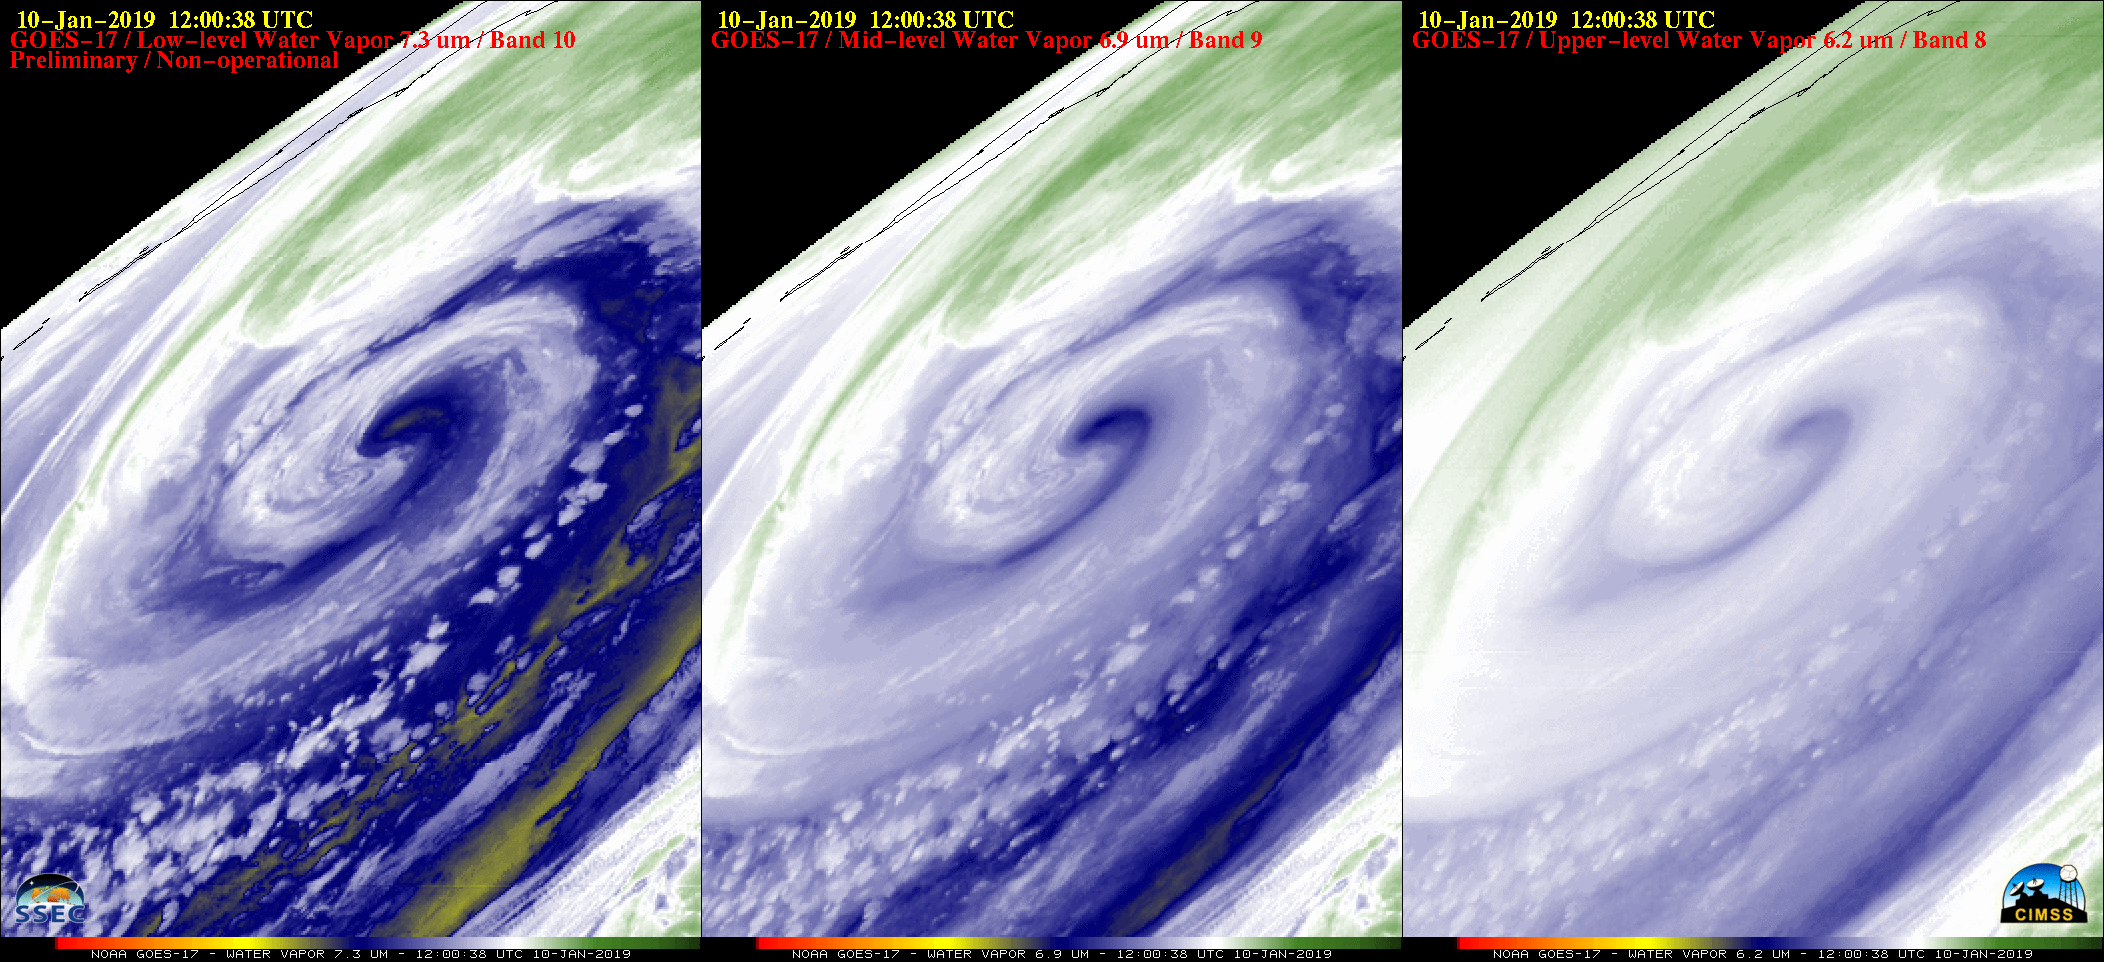 GOES-17 Low-level (7.3 µm, left), Mid-level (6.9 µm, center) and Upper-level (6.2 µm, right) Water Vapor images [click to play animation | MP4]